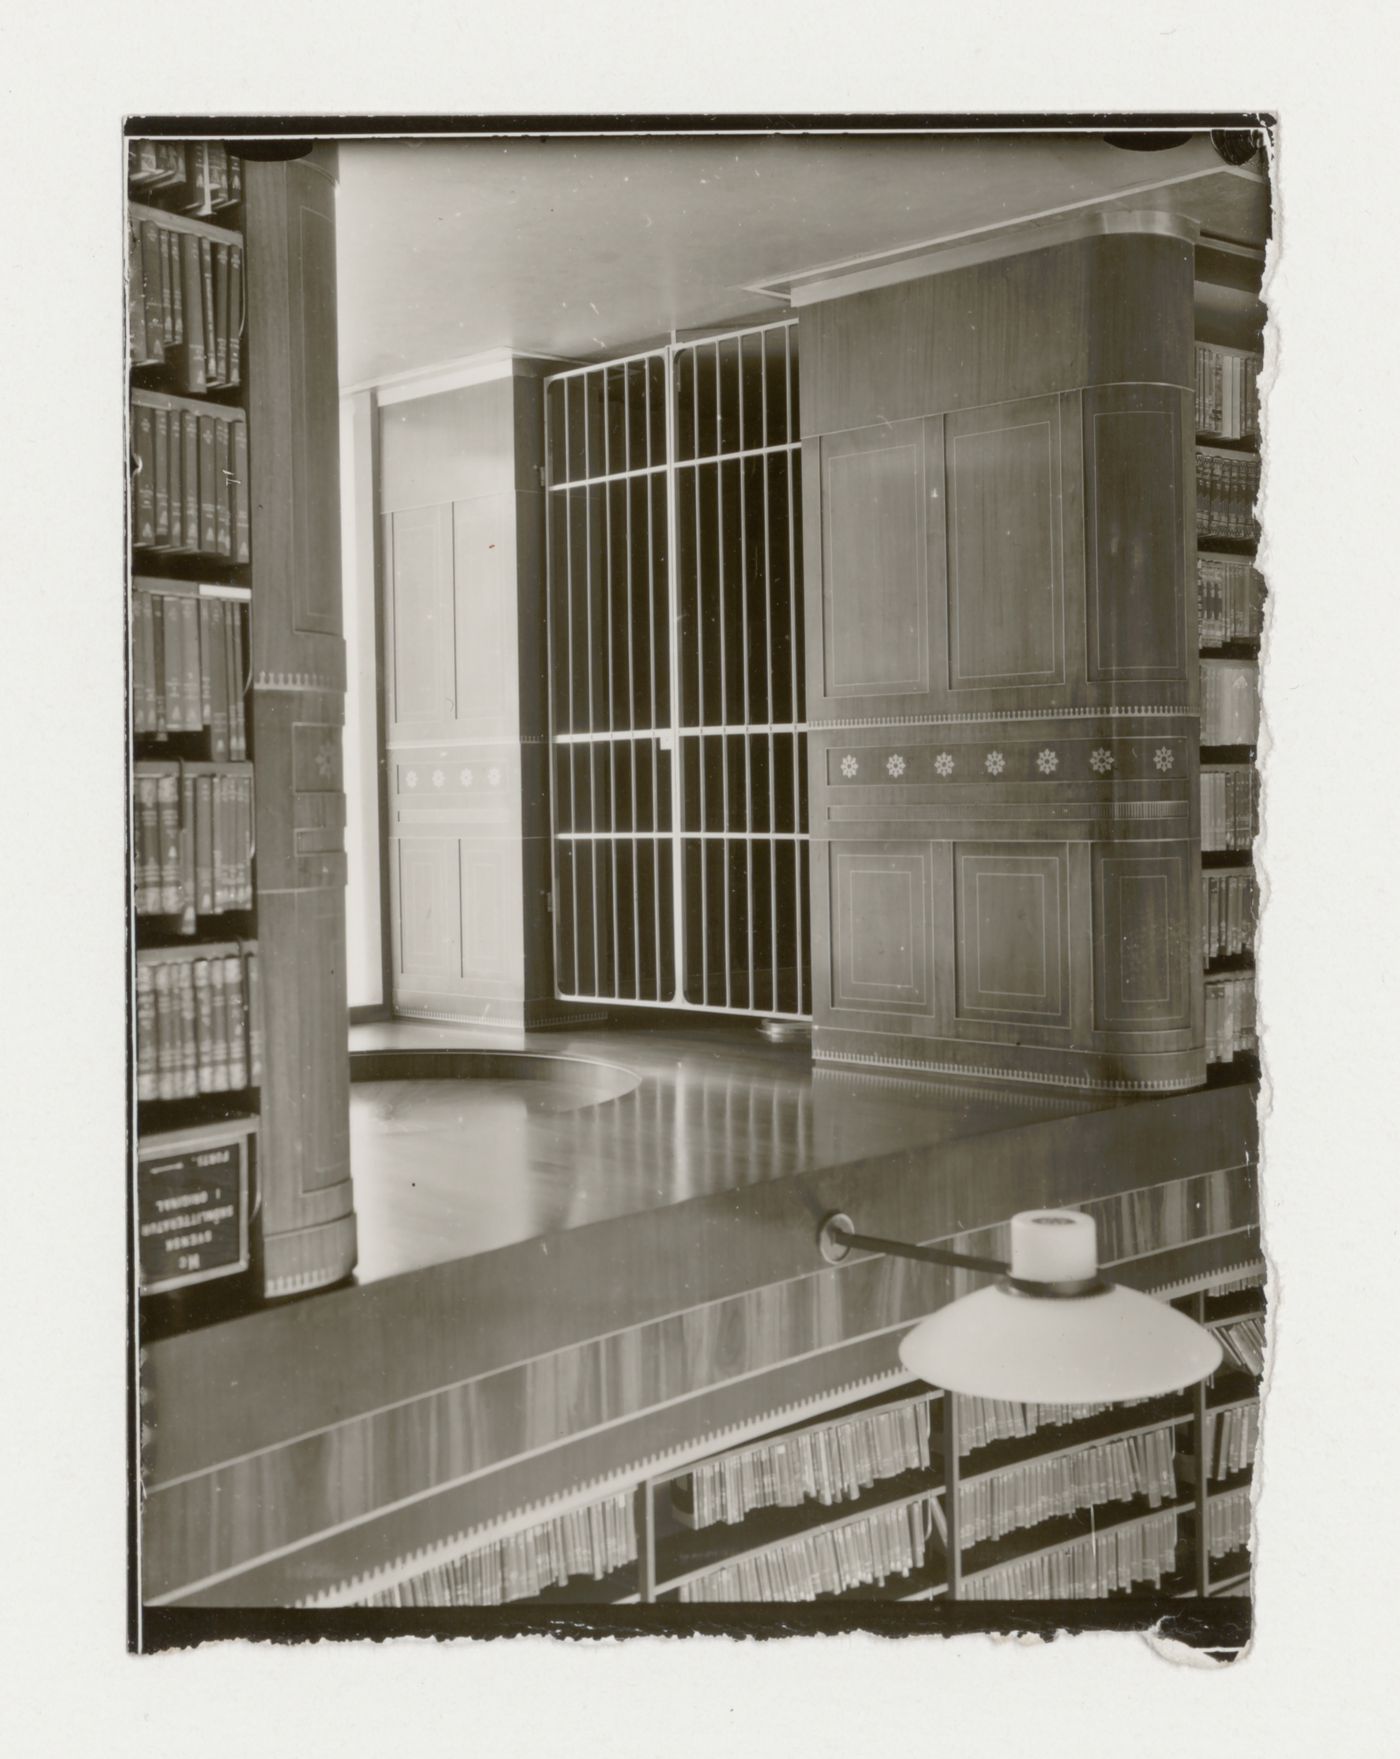 Interior view of the lending hall of Stockholm Public Library showing a passage entrance, 51-55 Odengatan, Stockholm